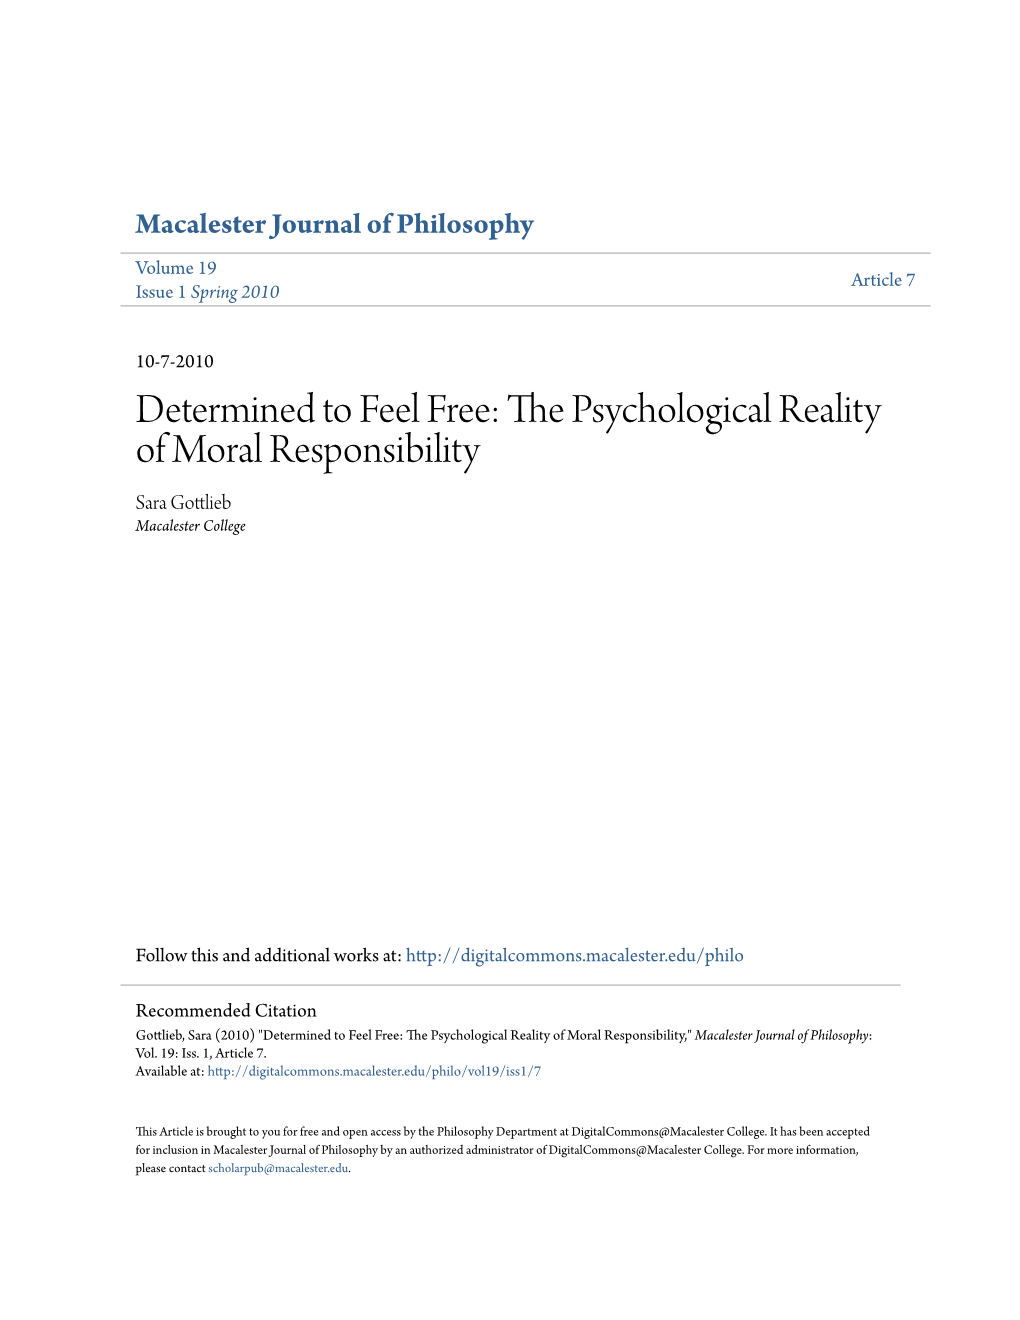 The Psychological Reality of Moral Responsibility